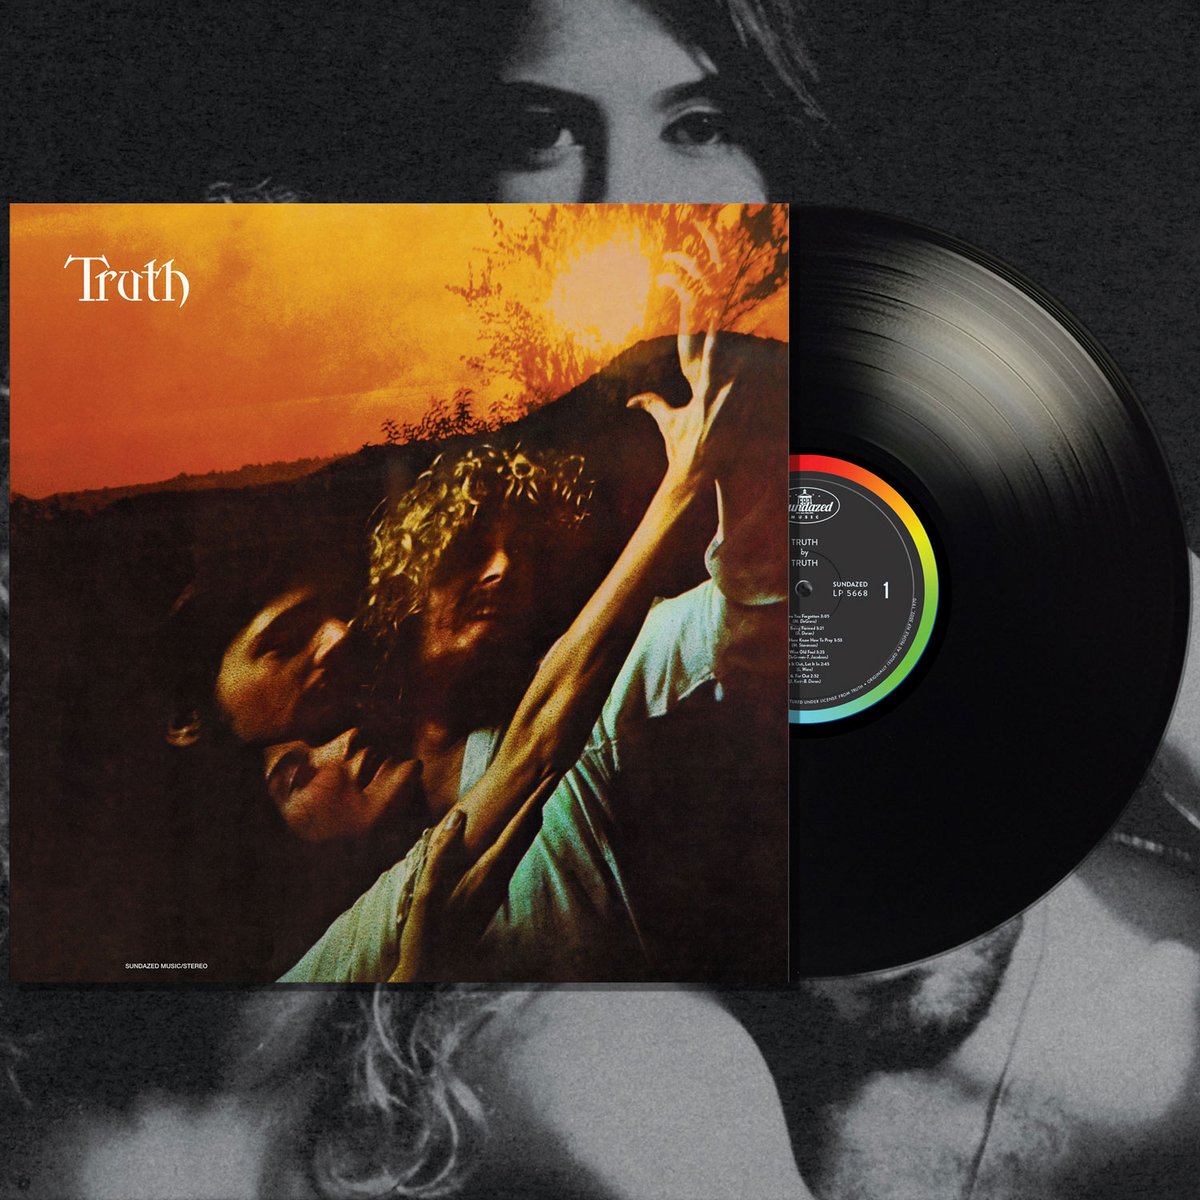 Back on LP for the first time since its 1970 release! Sitar head-swirlers, sunny, melodic harmonies and a country folk influence all blend together to bring listeners Truth! In stores 6/14! Live in a record store desert? Preorder here: sundazed.com/truth.aspx